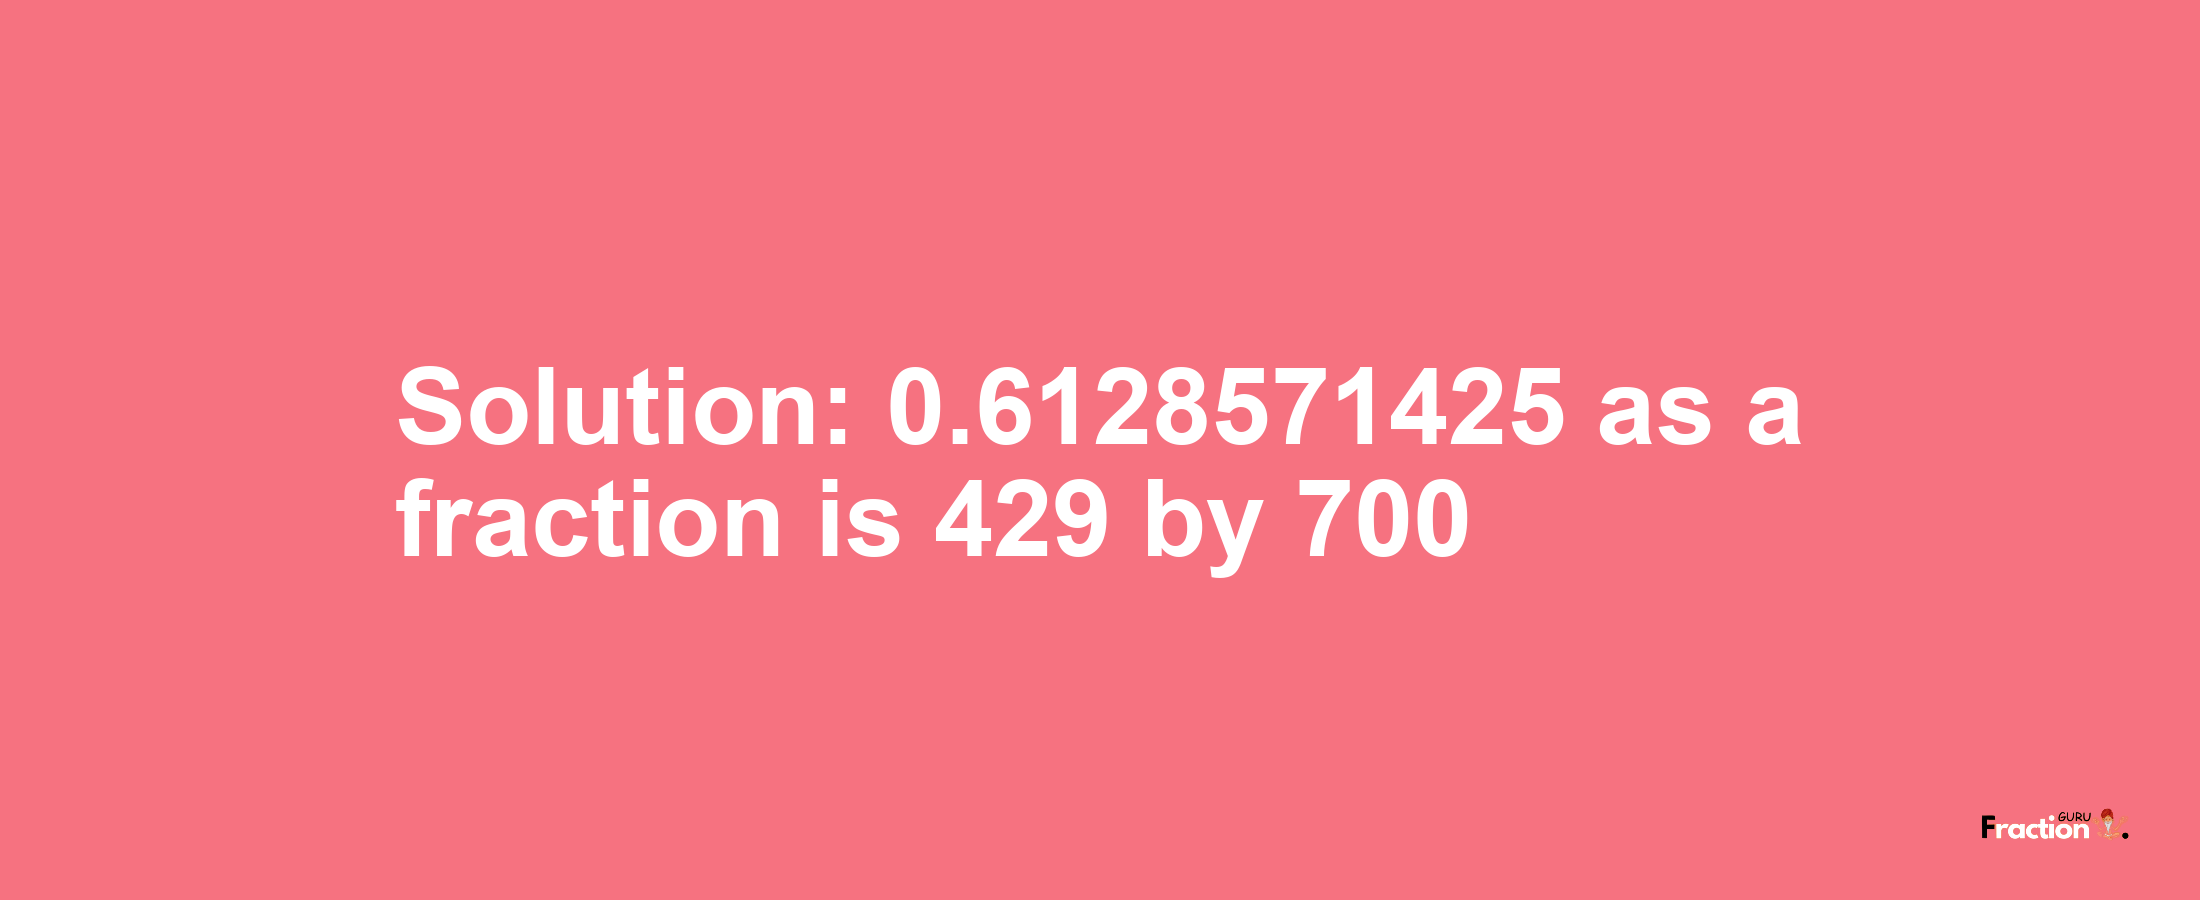 Solution:0.6128571425 as a fraction is 429/700